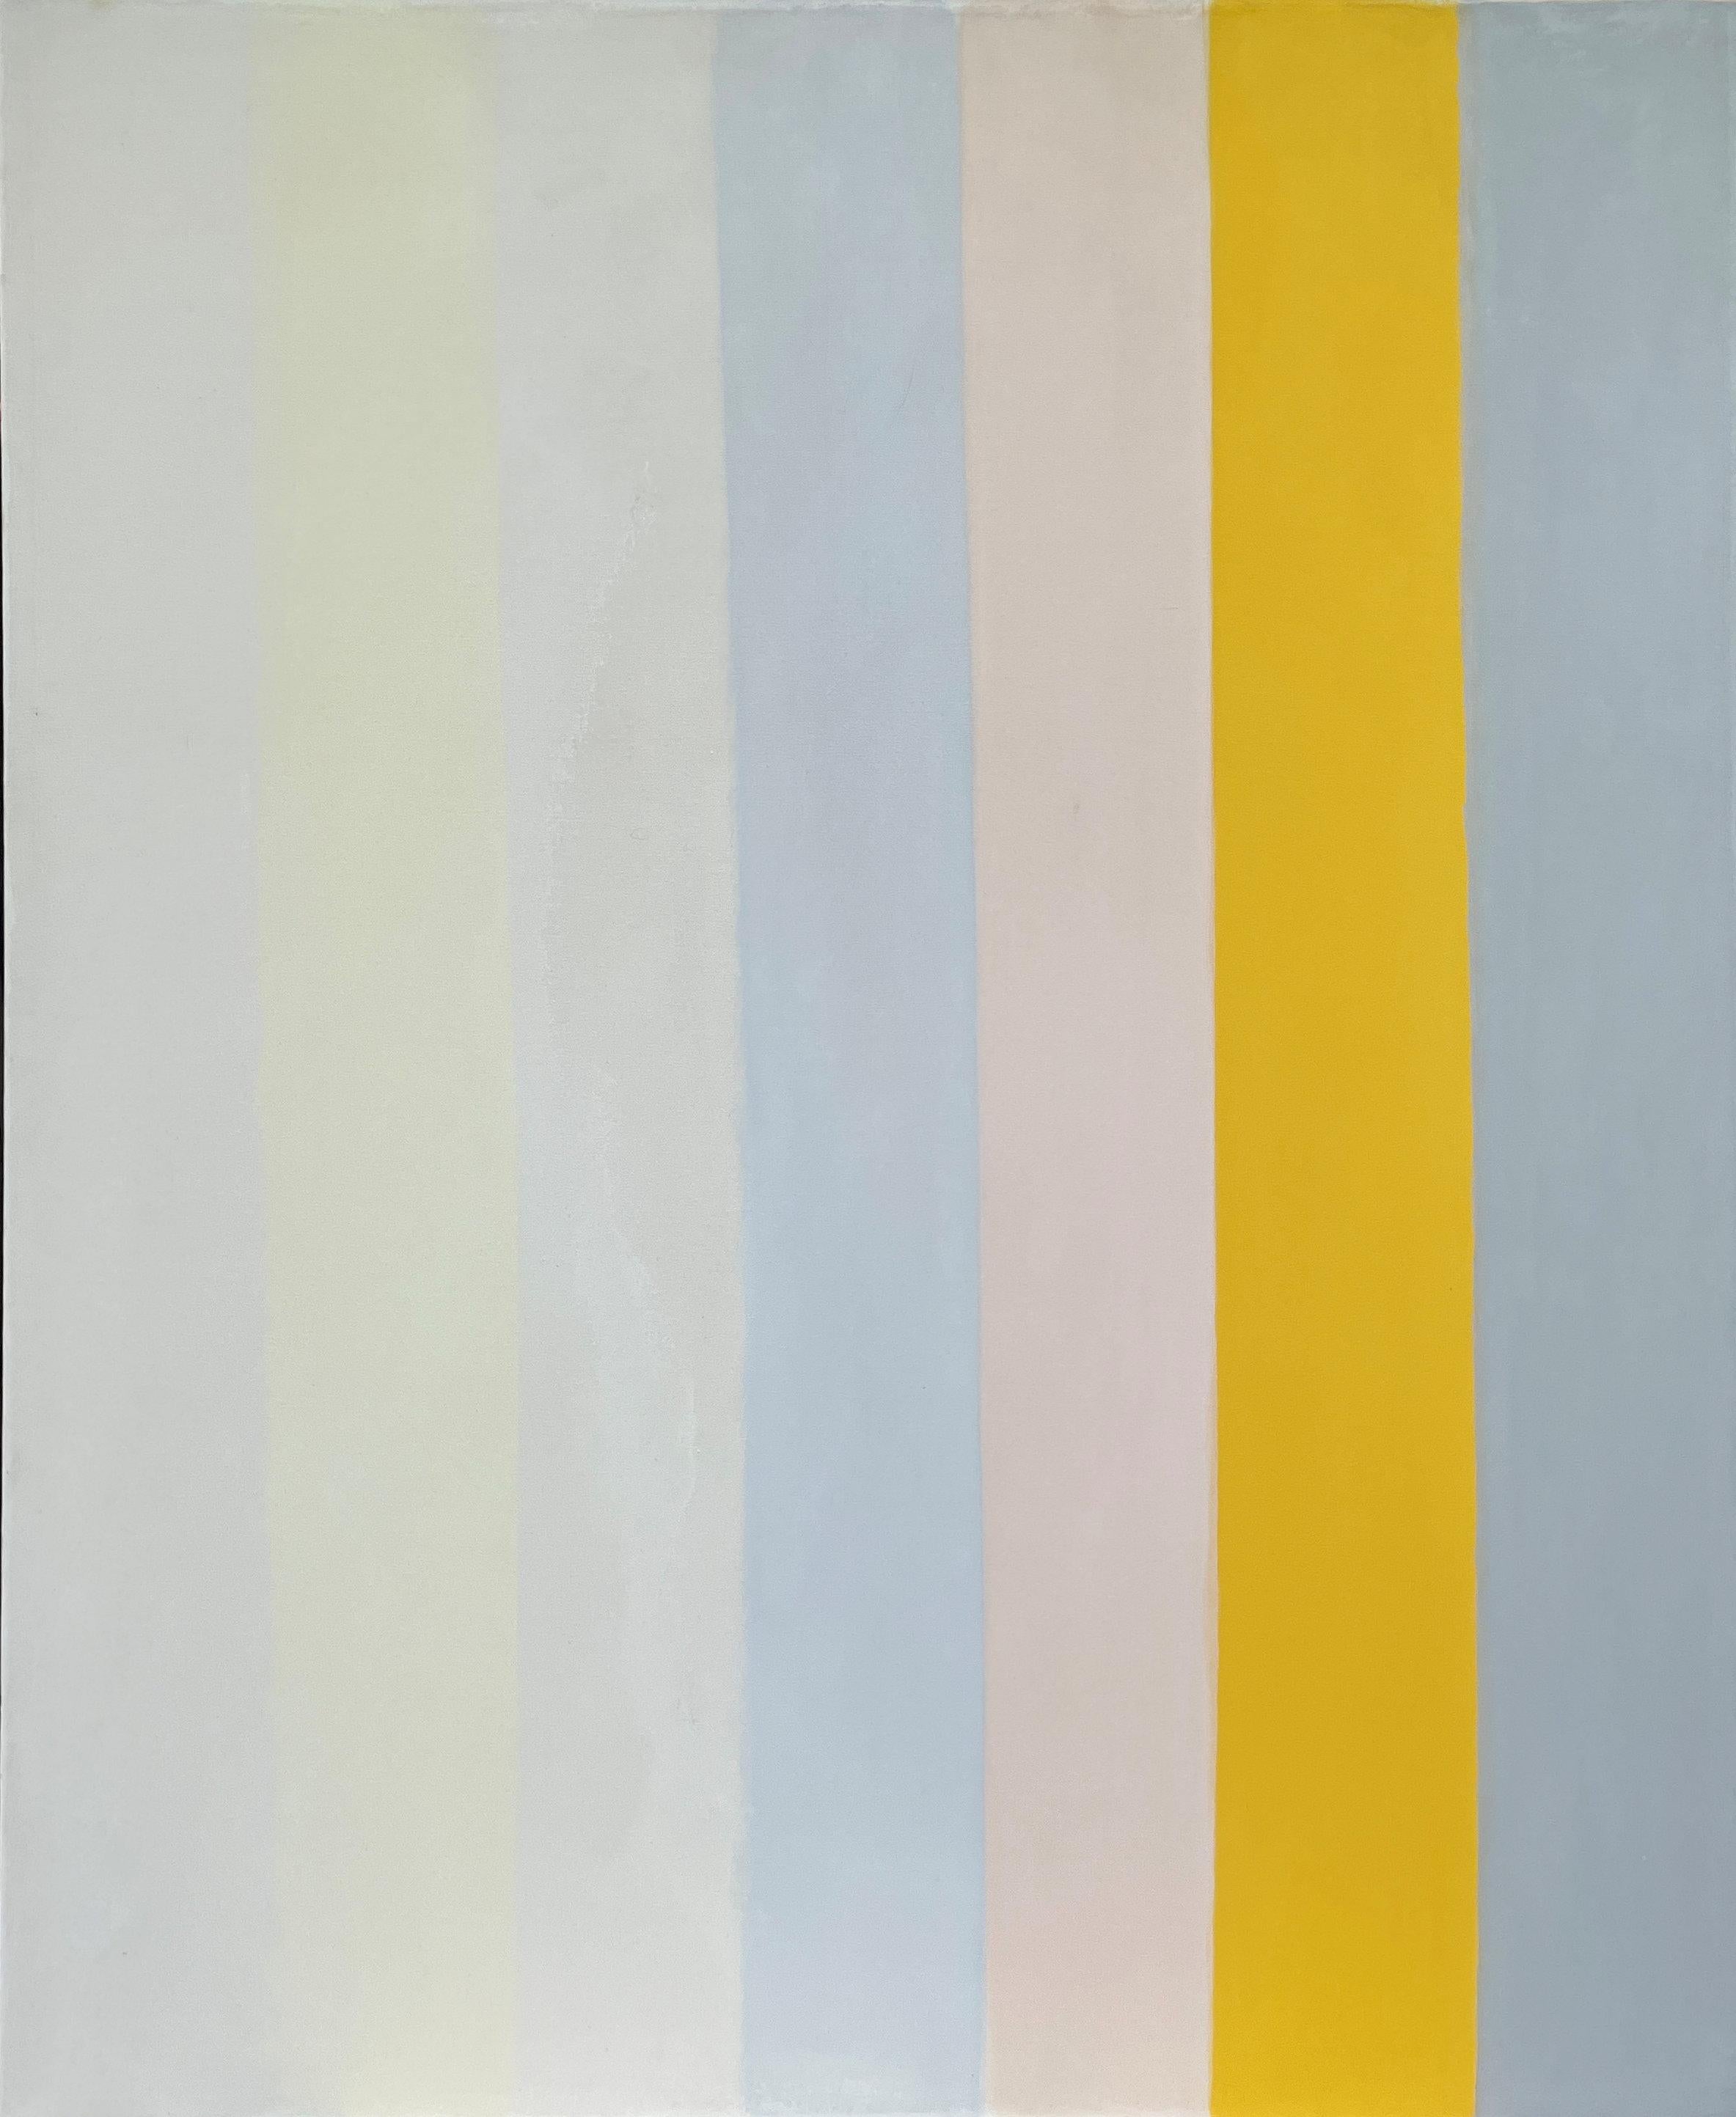 Calvert Coggeshall
Untitled, circa 1970
Acrylic on canvas
80 x 67 inches

Calvert Coggeshall worked as an abstract painter and interior designer primarily in Maine and New York City. From 1951 to 1978, he exhibited regularly with the Betty Parsons